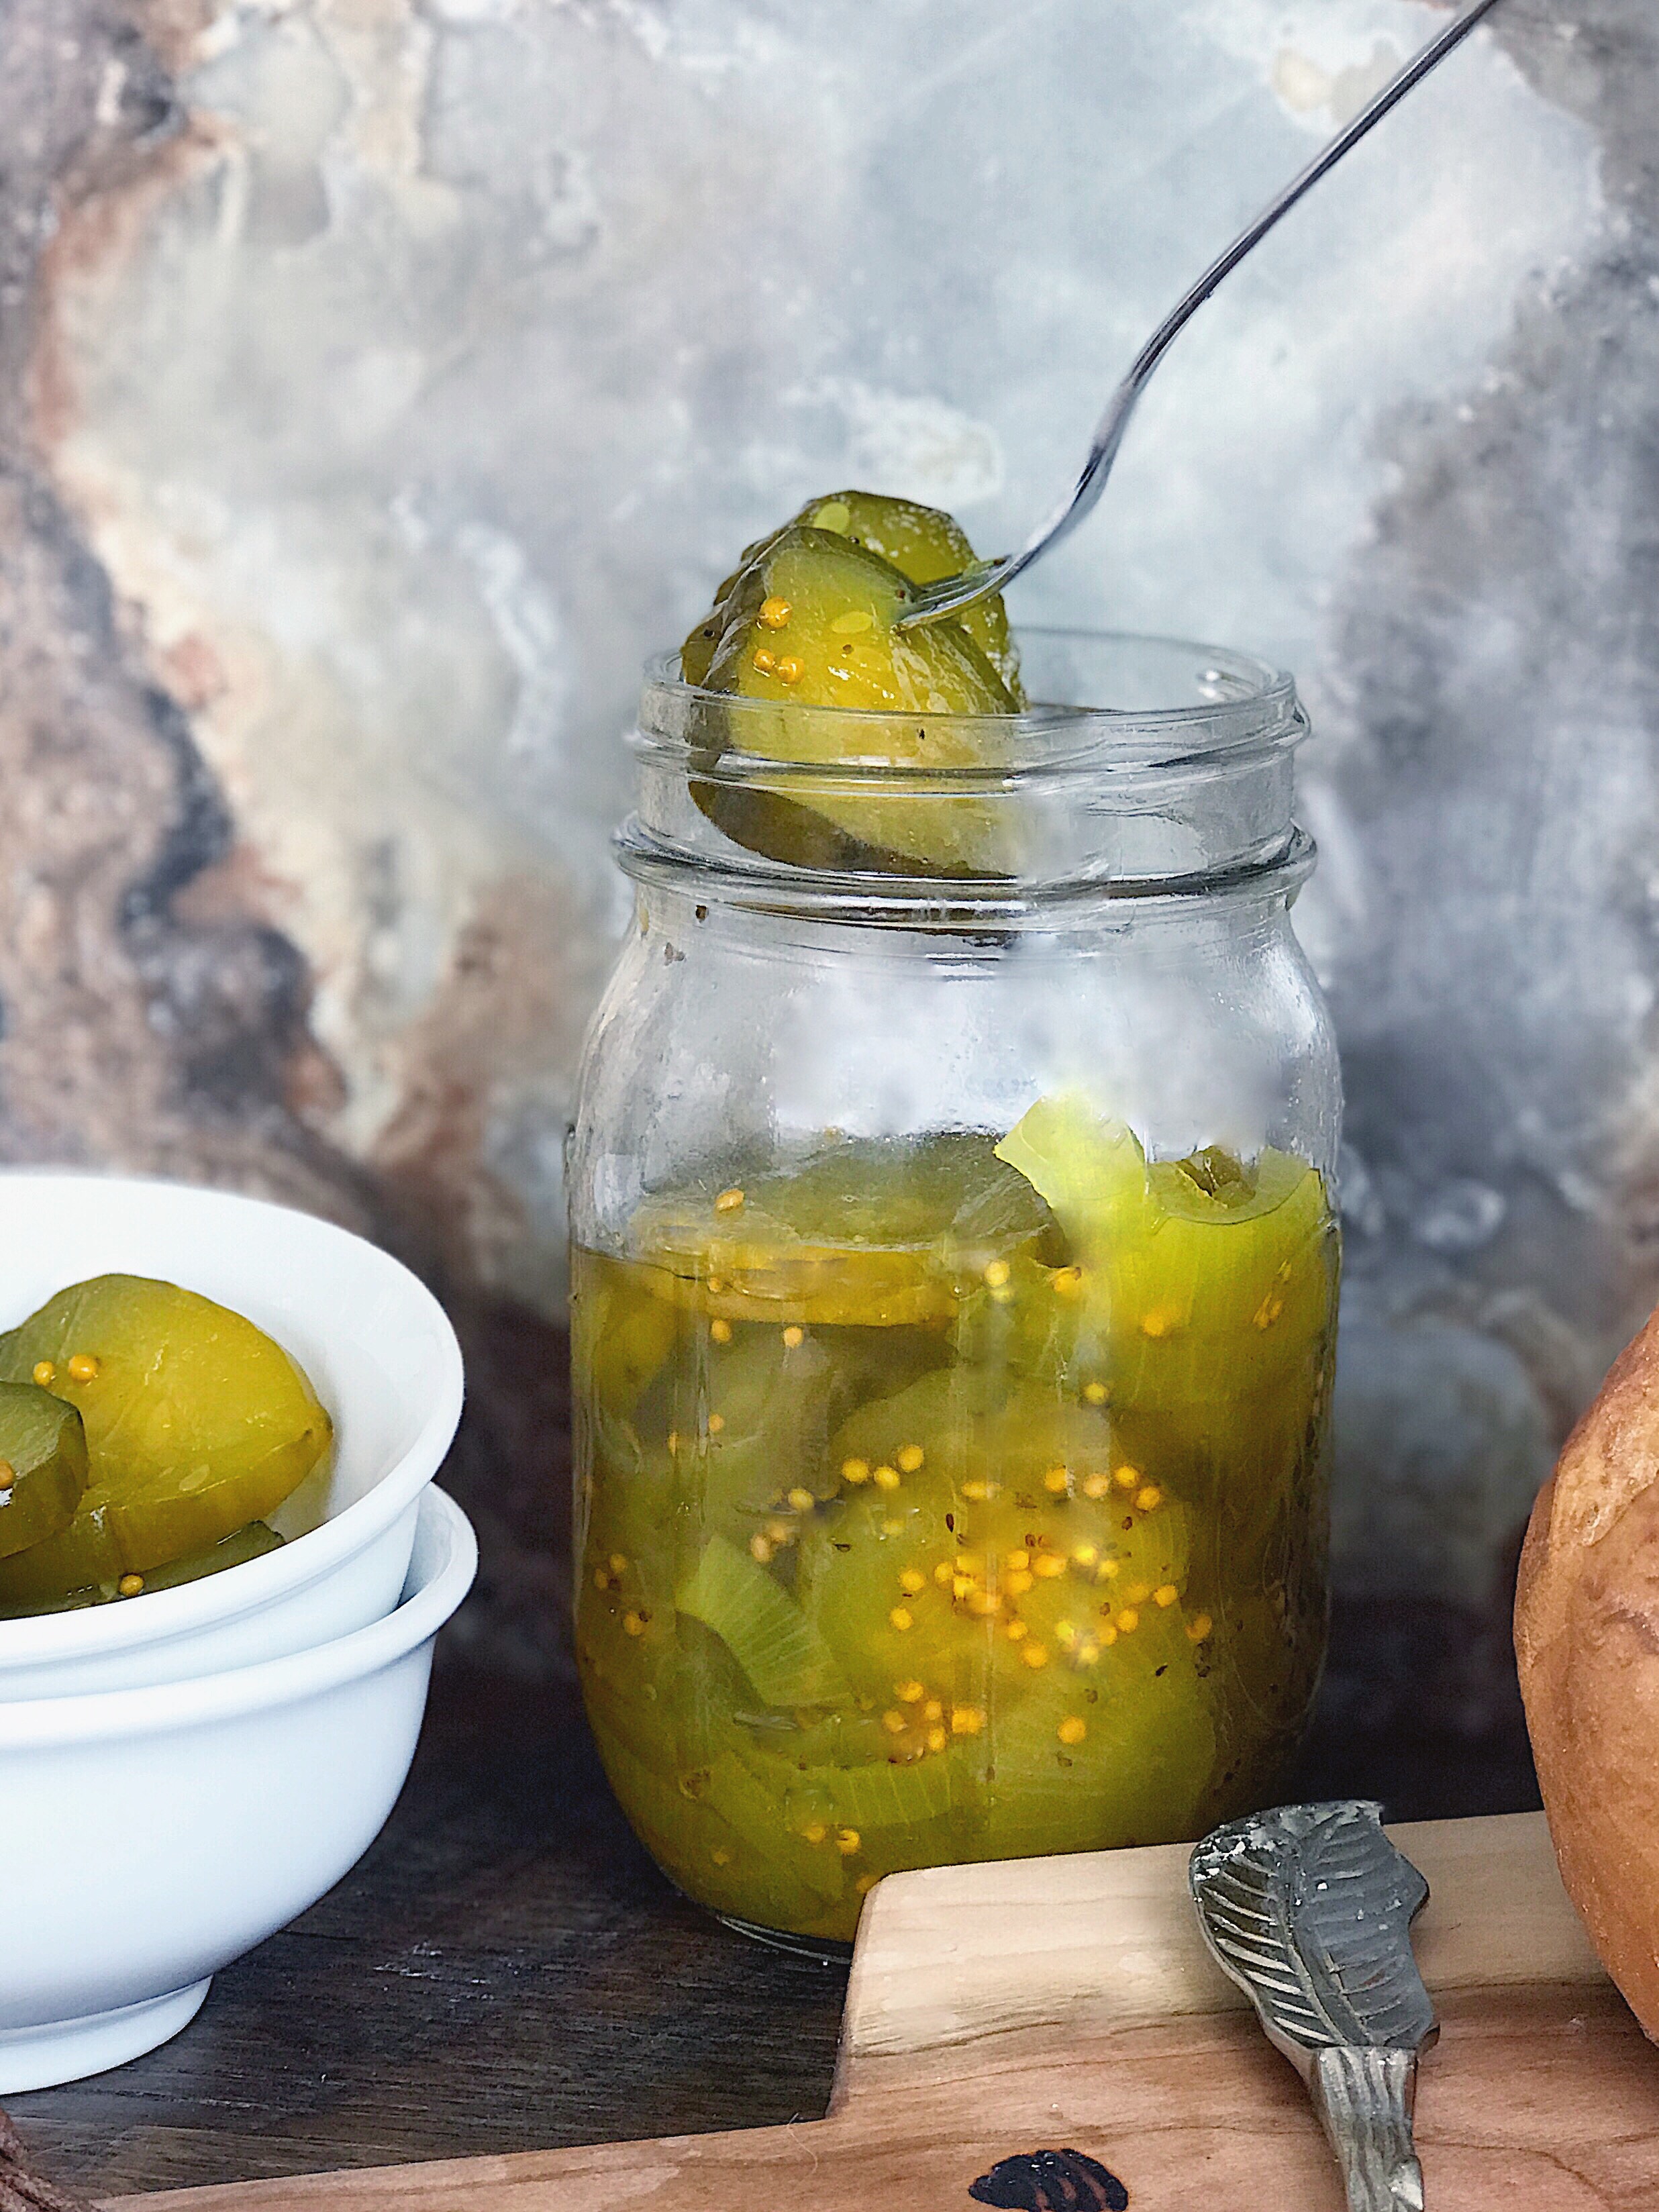 Bread and Butter Pickles recipe with turmeric